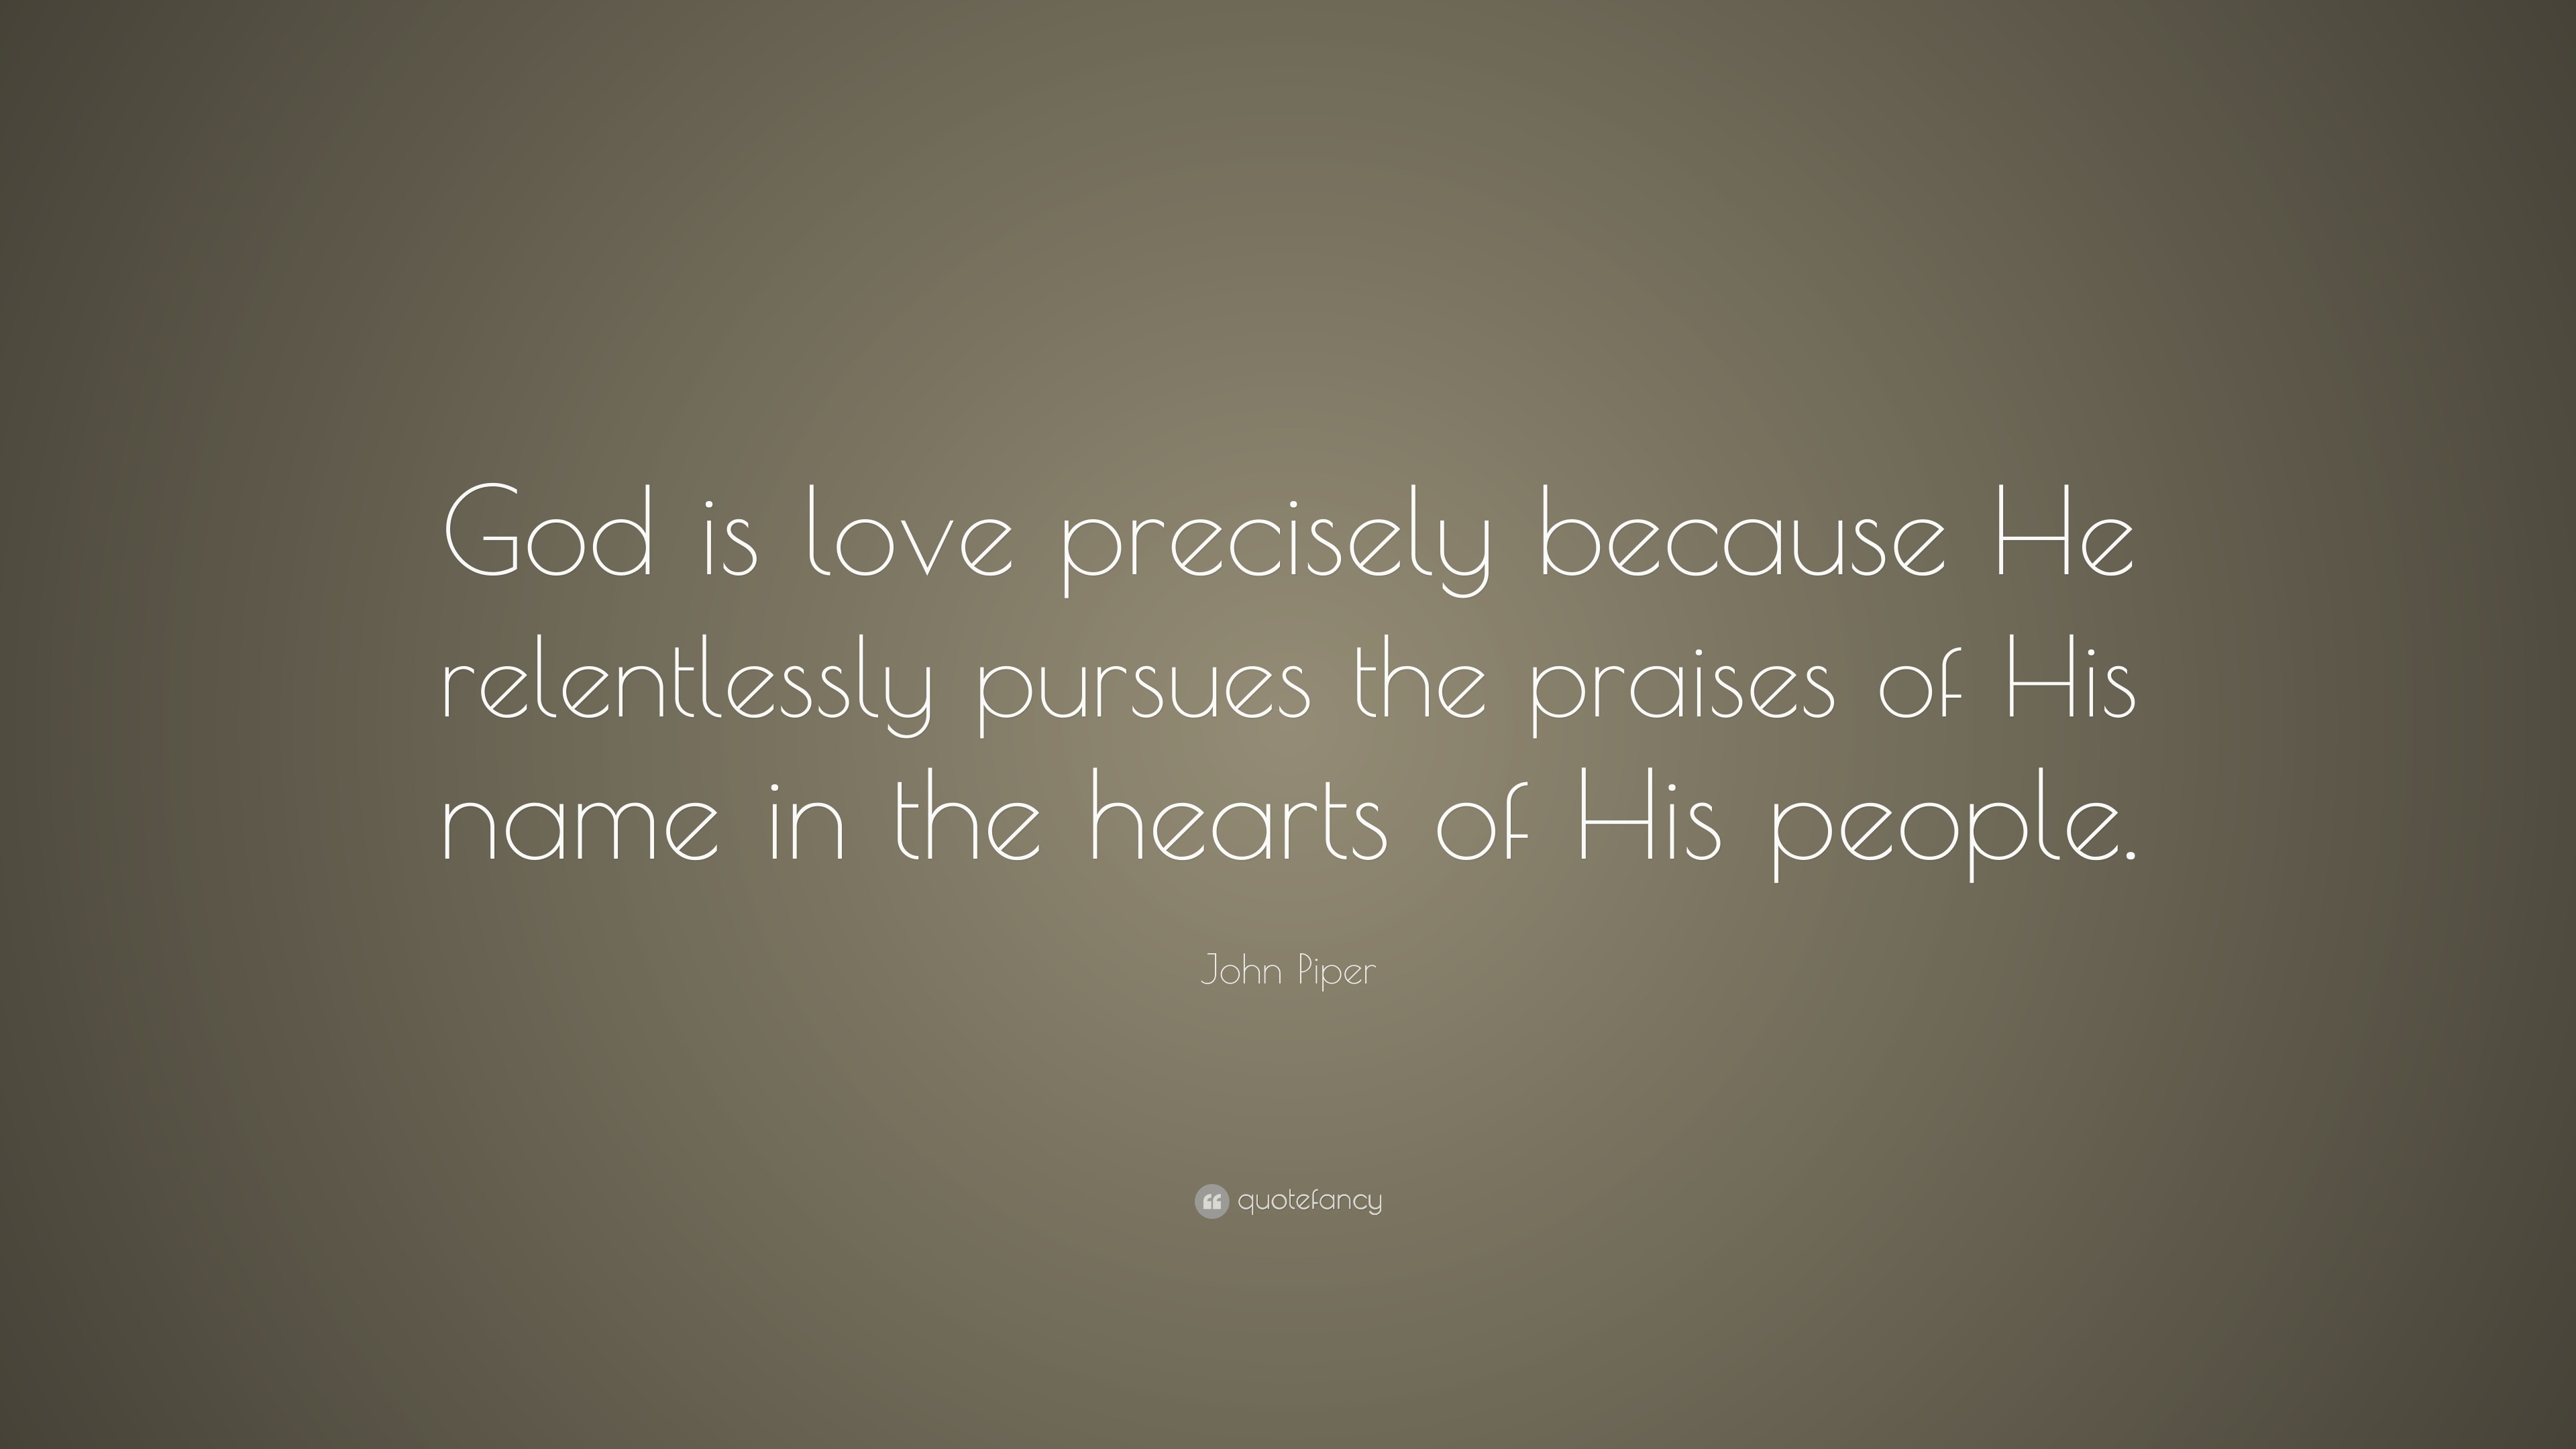 3840x2160 John Piper Quote: “God is love precisely because He relentlessly pursues  the praises of